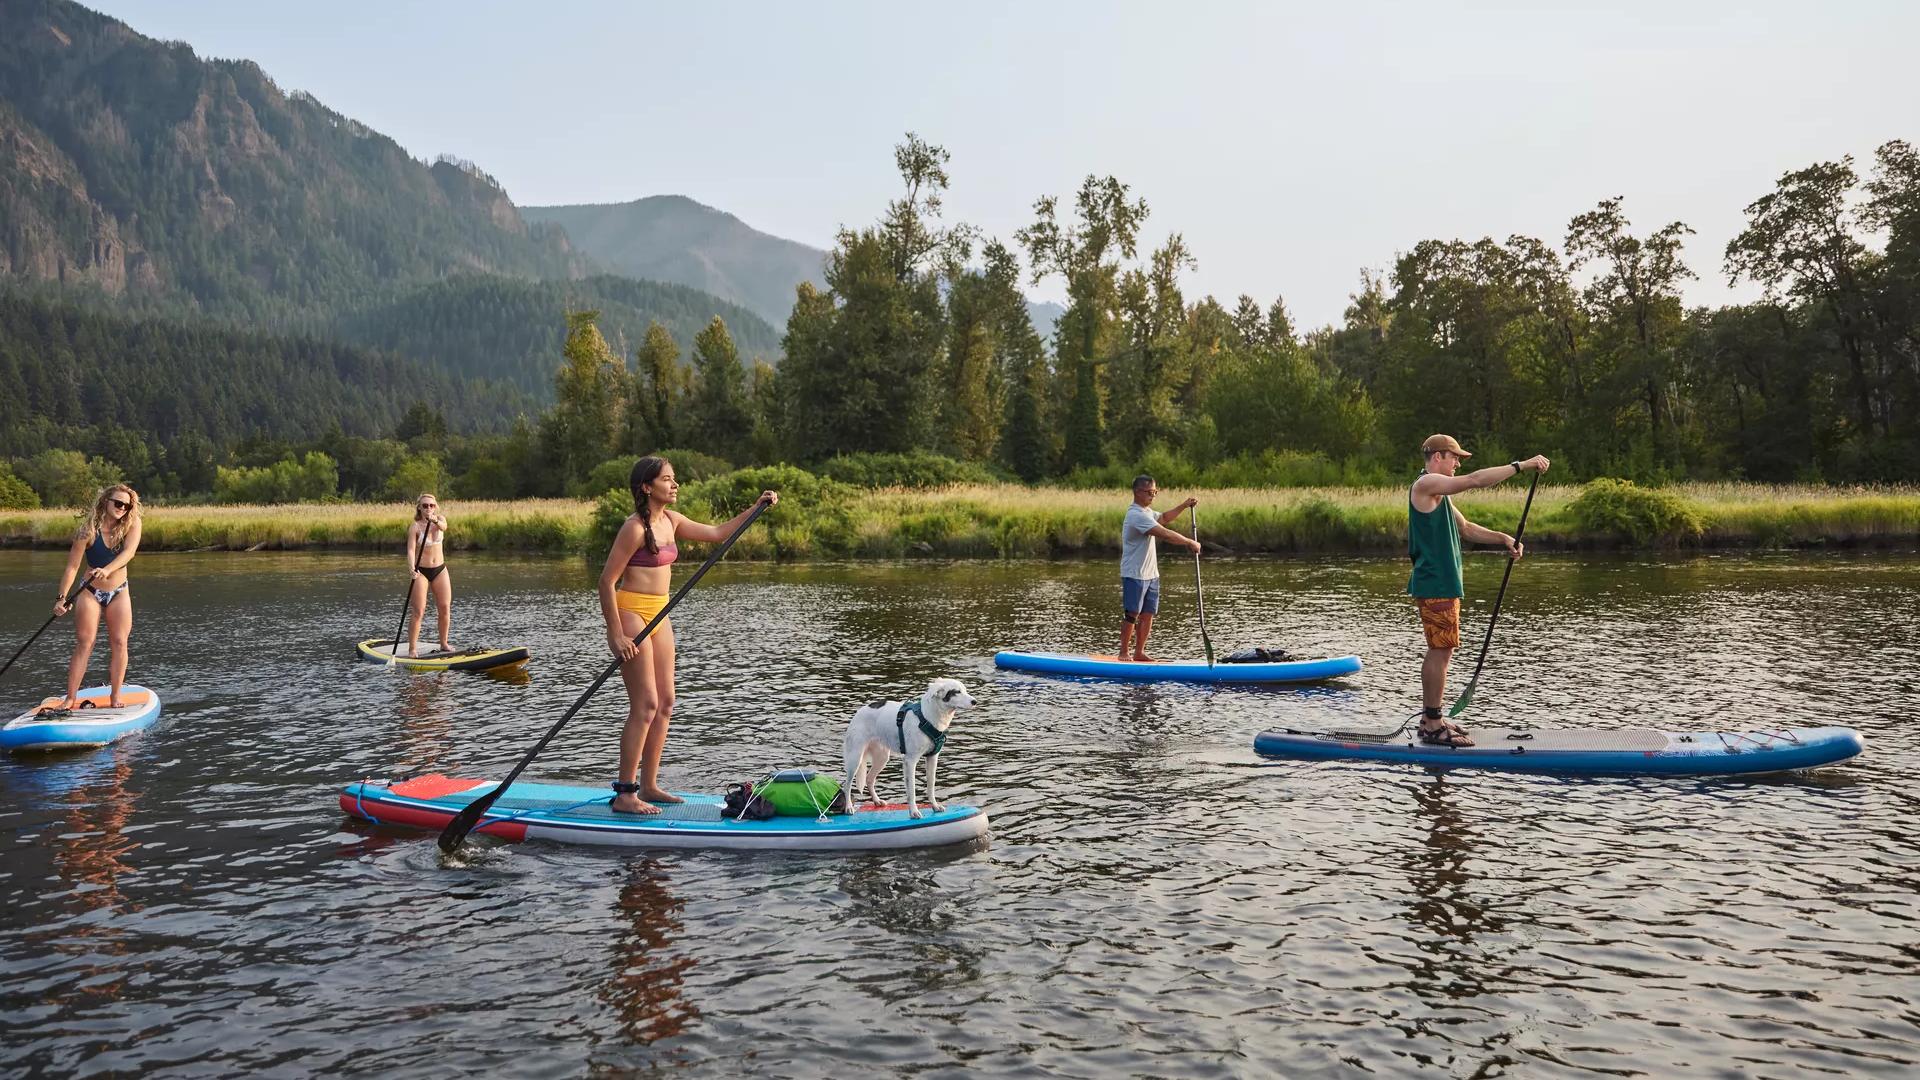 Five friends and a dog on stand-up paddleboards in a lake listening to music on a SoundLink Flex bluetooth speaker